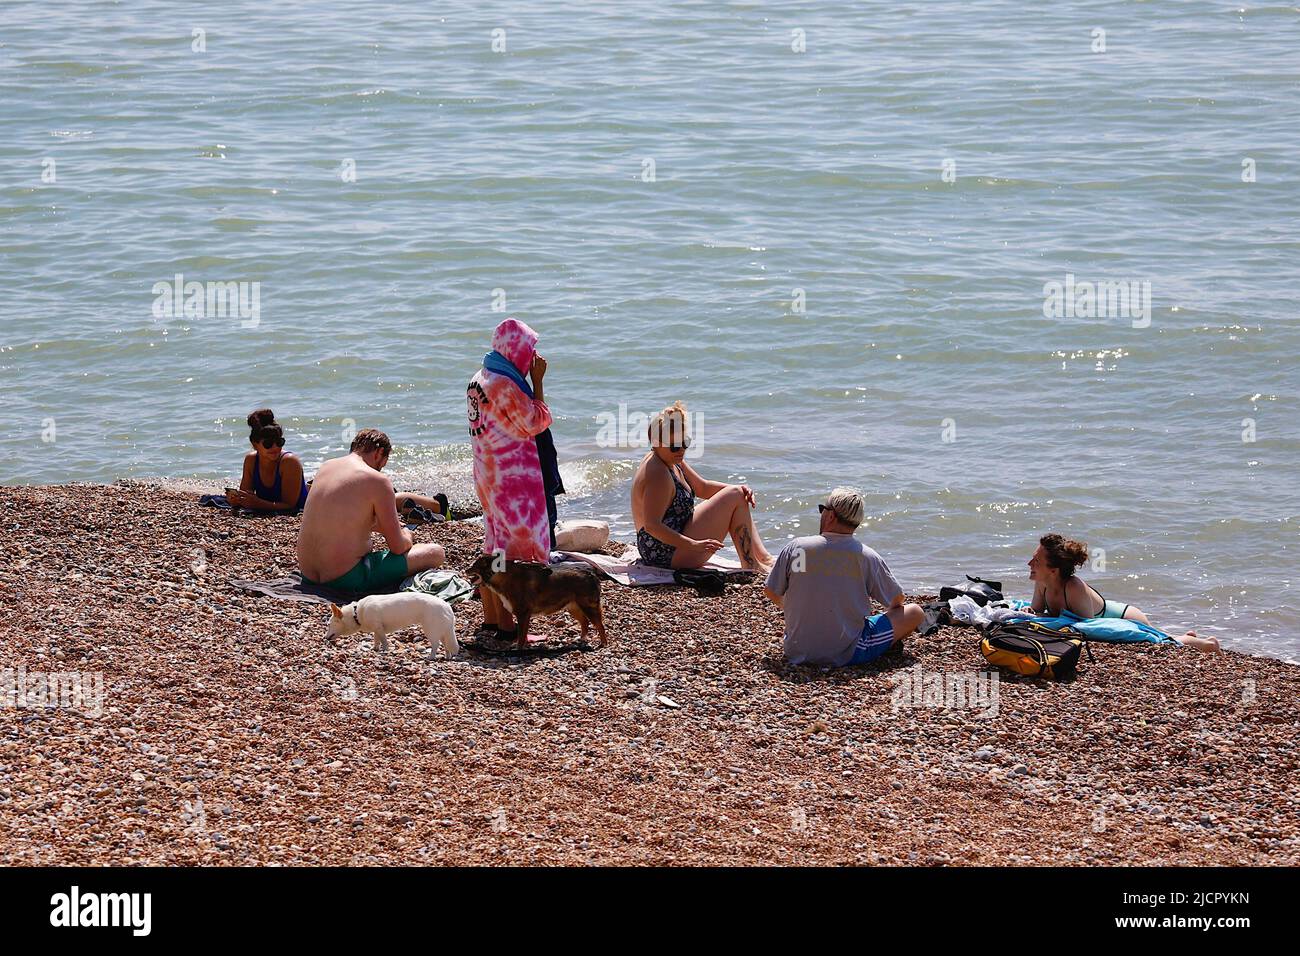 Hastings, East Sussex, UK. 15 Jun, 2022. UK Weather: Hot and sunny at the seaside town of Hastings in East Sussex as Brits enjoy the warm weather today along the seafront promenade. A family sits by the edge of the sea lapping up the gentle waves. Photo Credit: Paul Lawrenson /Alamy Live News Stock Photo